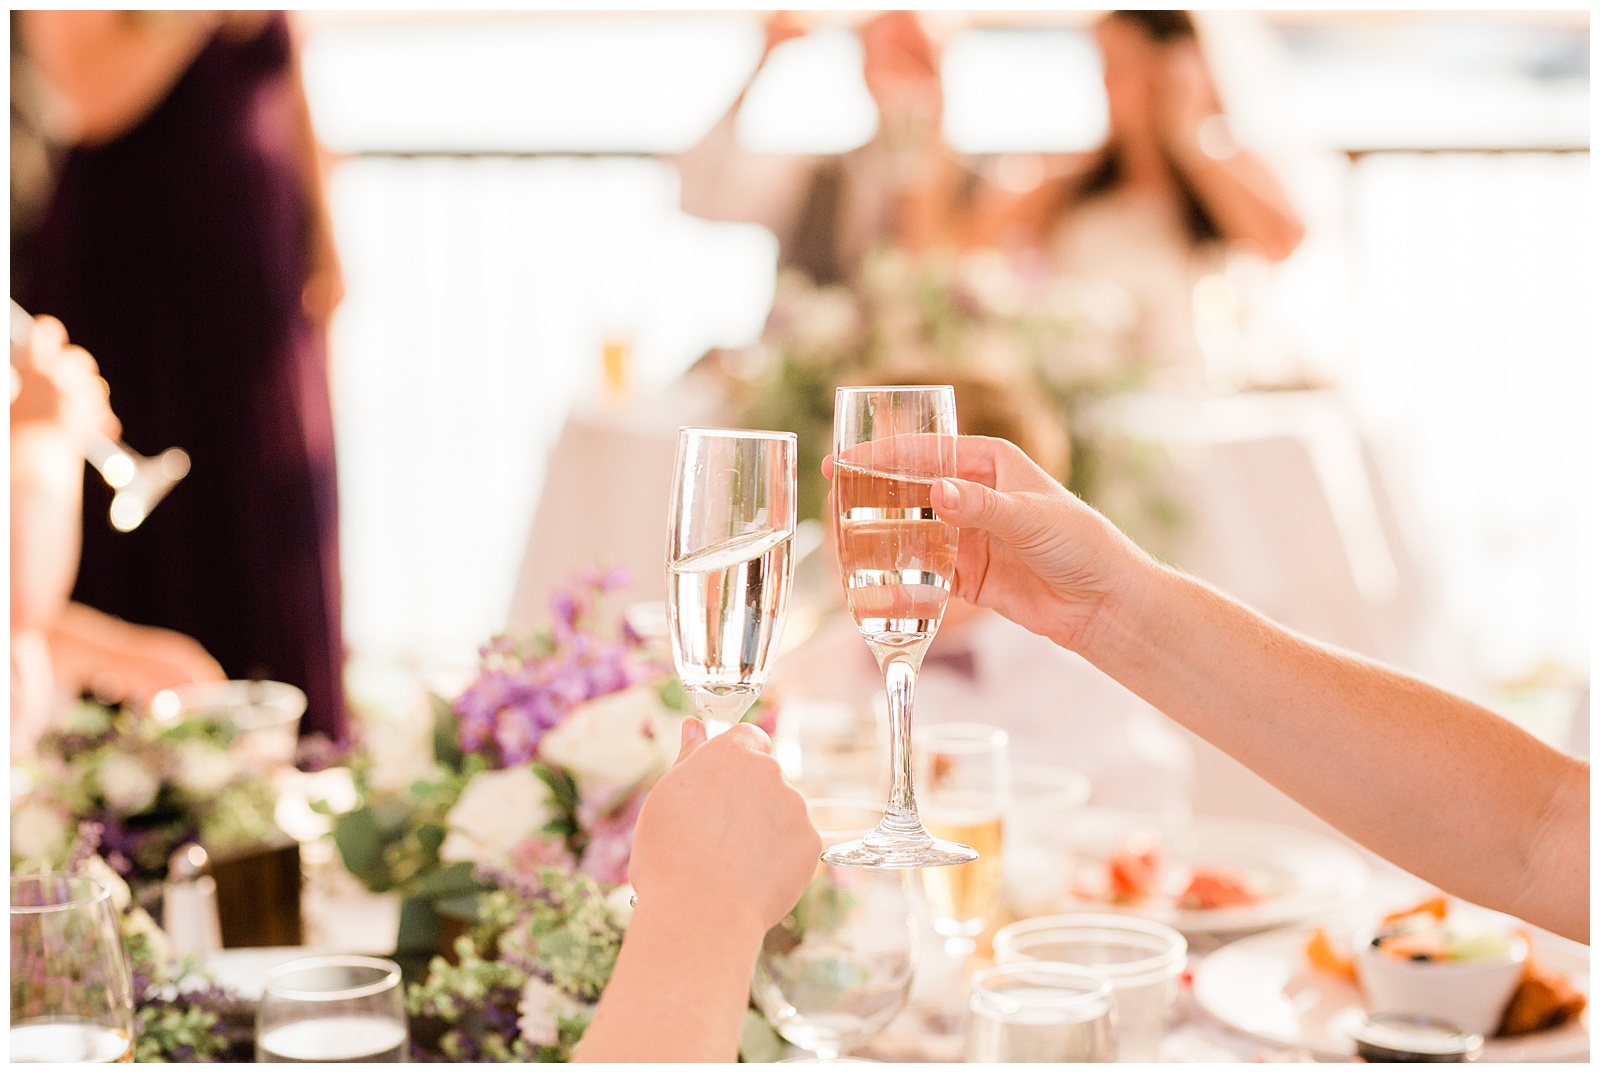 guests toasting during a wedding reception at the pines resort in bass lake